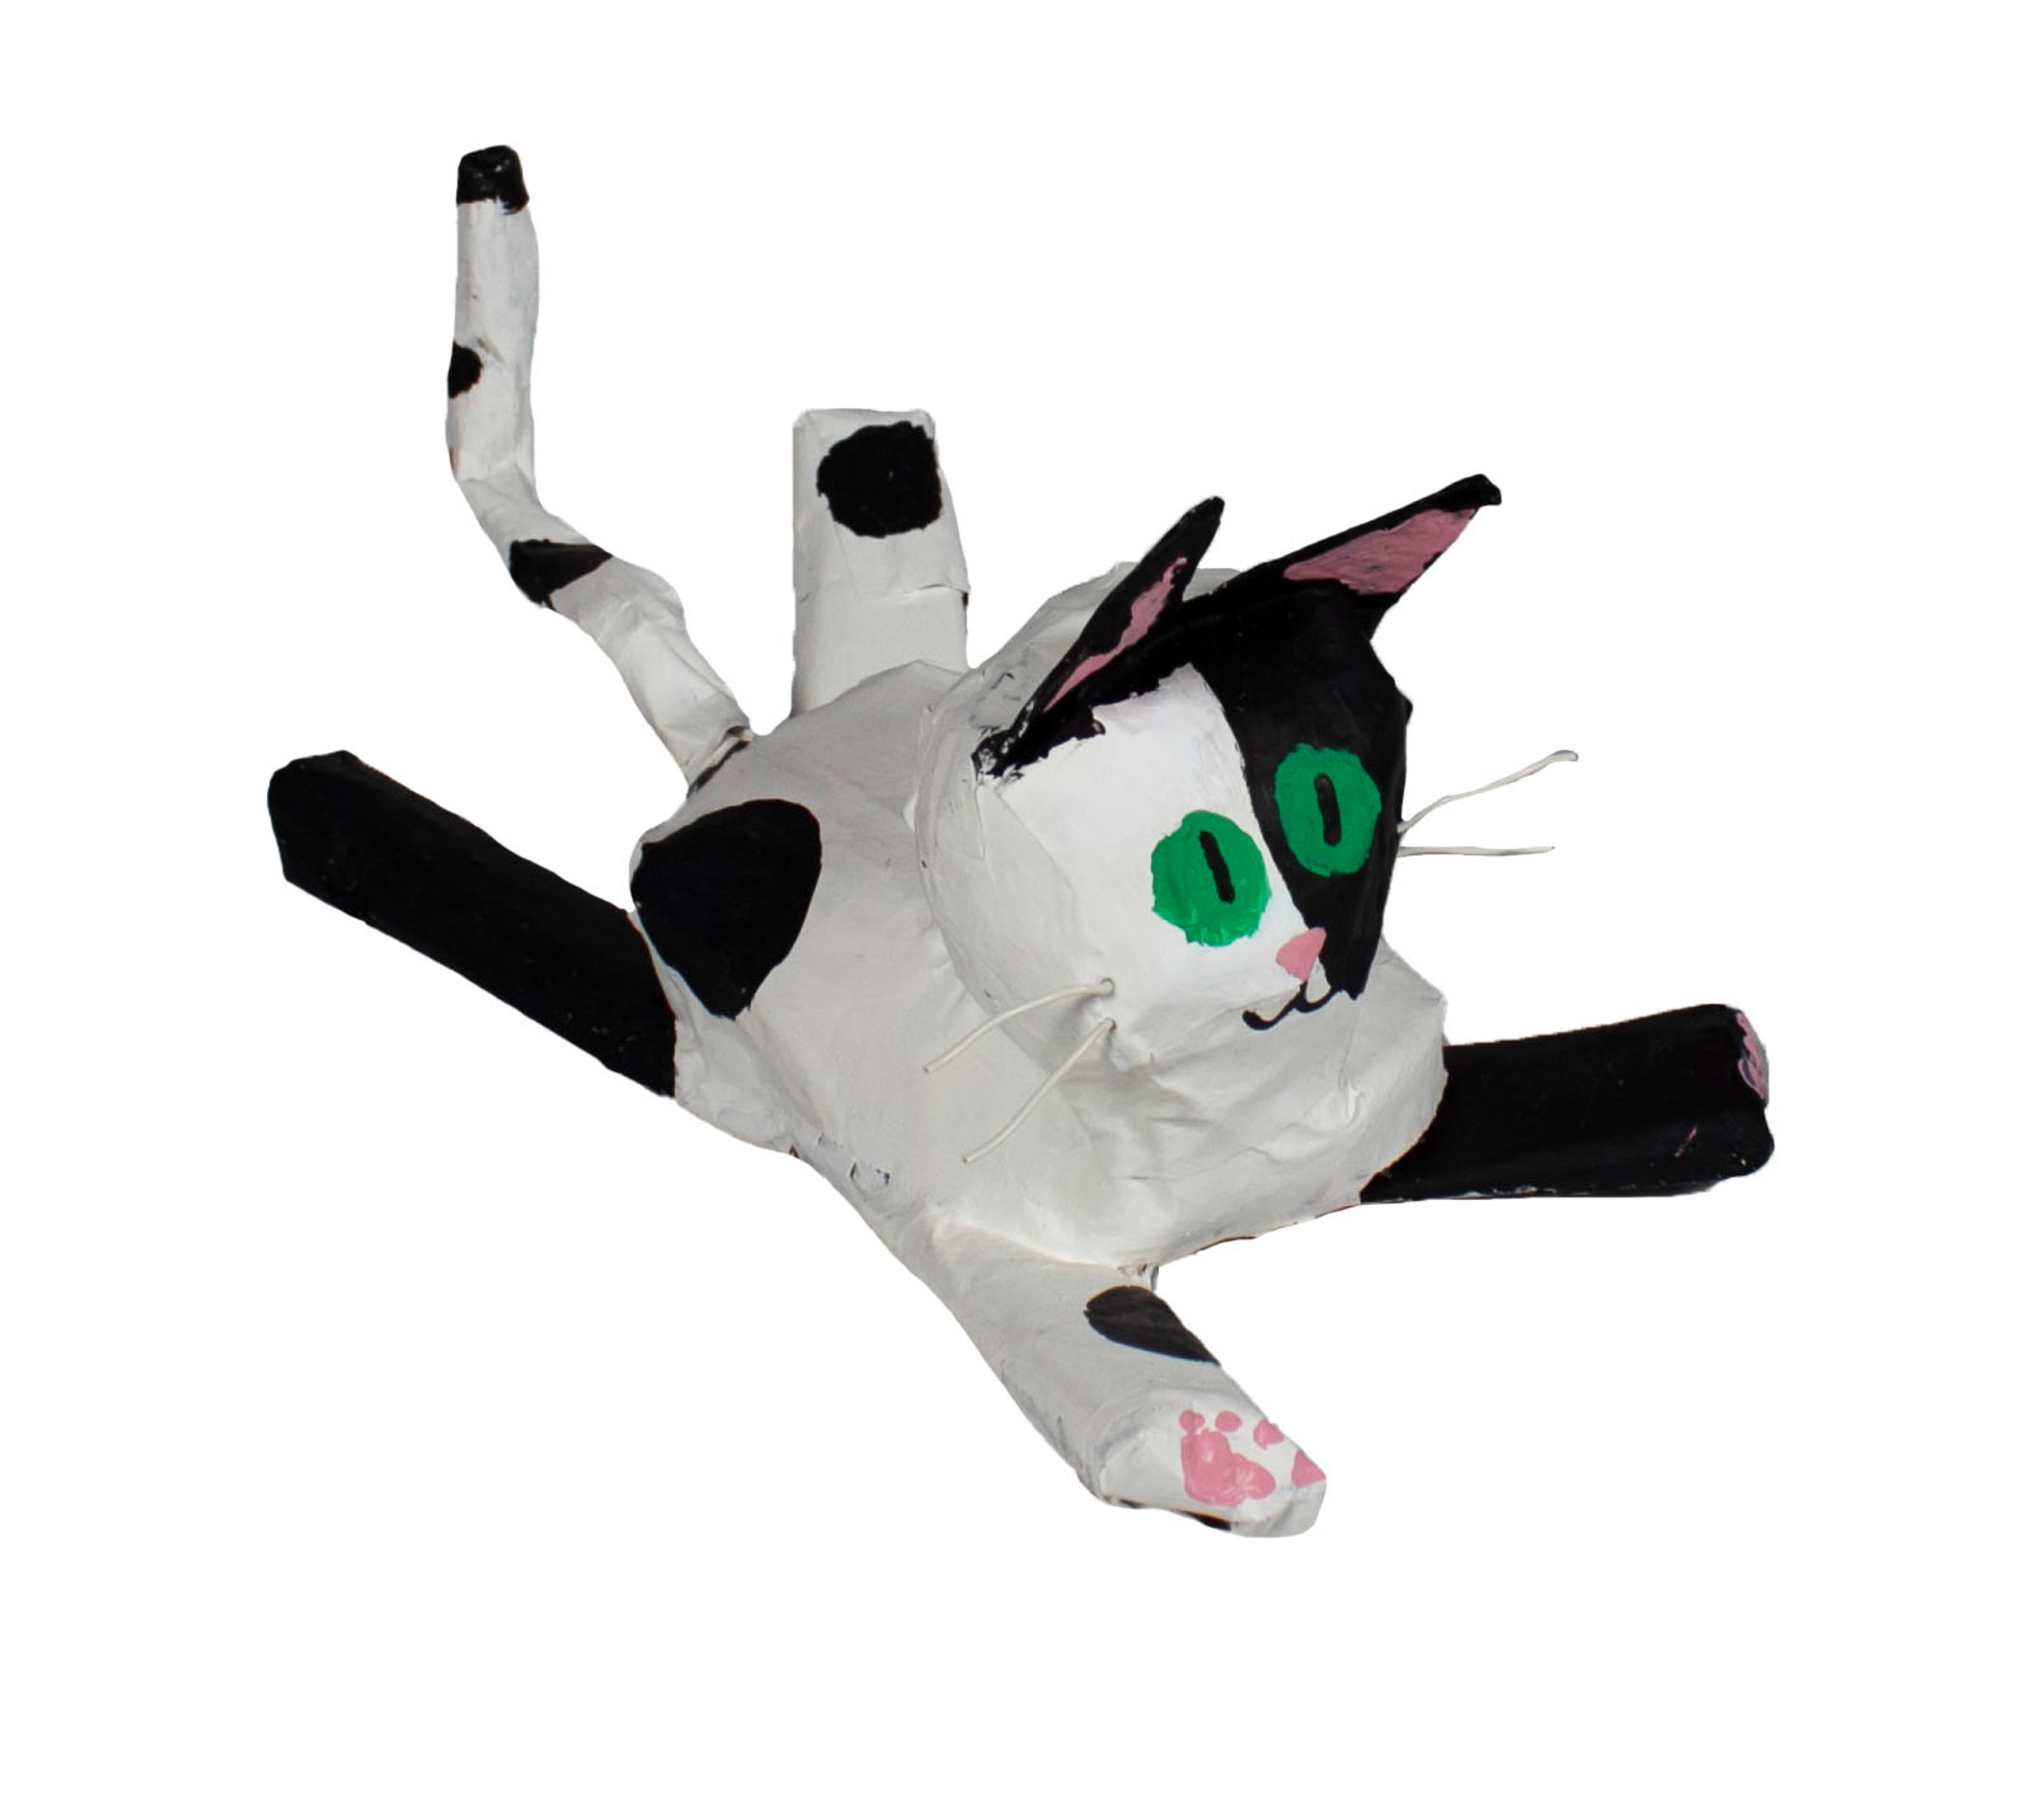 Papier mâché sculpture of white cat with round green eyes and black spots, lying splayed on all four extended legs, facing rightward, with a wry smile on its face. The cat's pink paws, pink nose, and pink inner ears are visible. The cat's left front leg, right rear leg, and left side of its face are black. Two white whiskers extend from the right side of the cats' face, and two darker whiskers extend from the left.